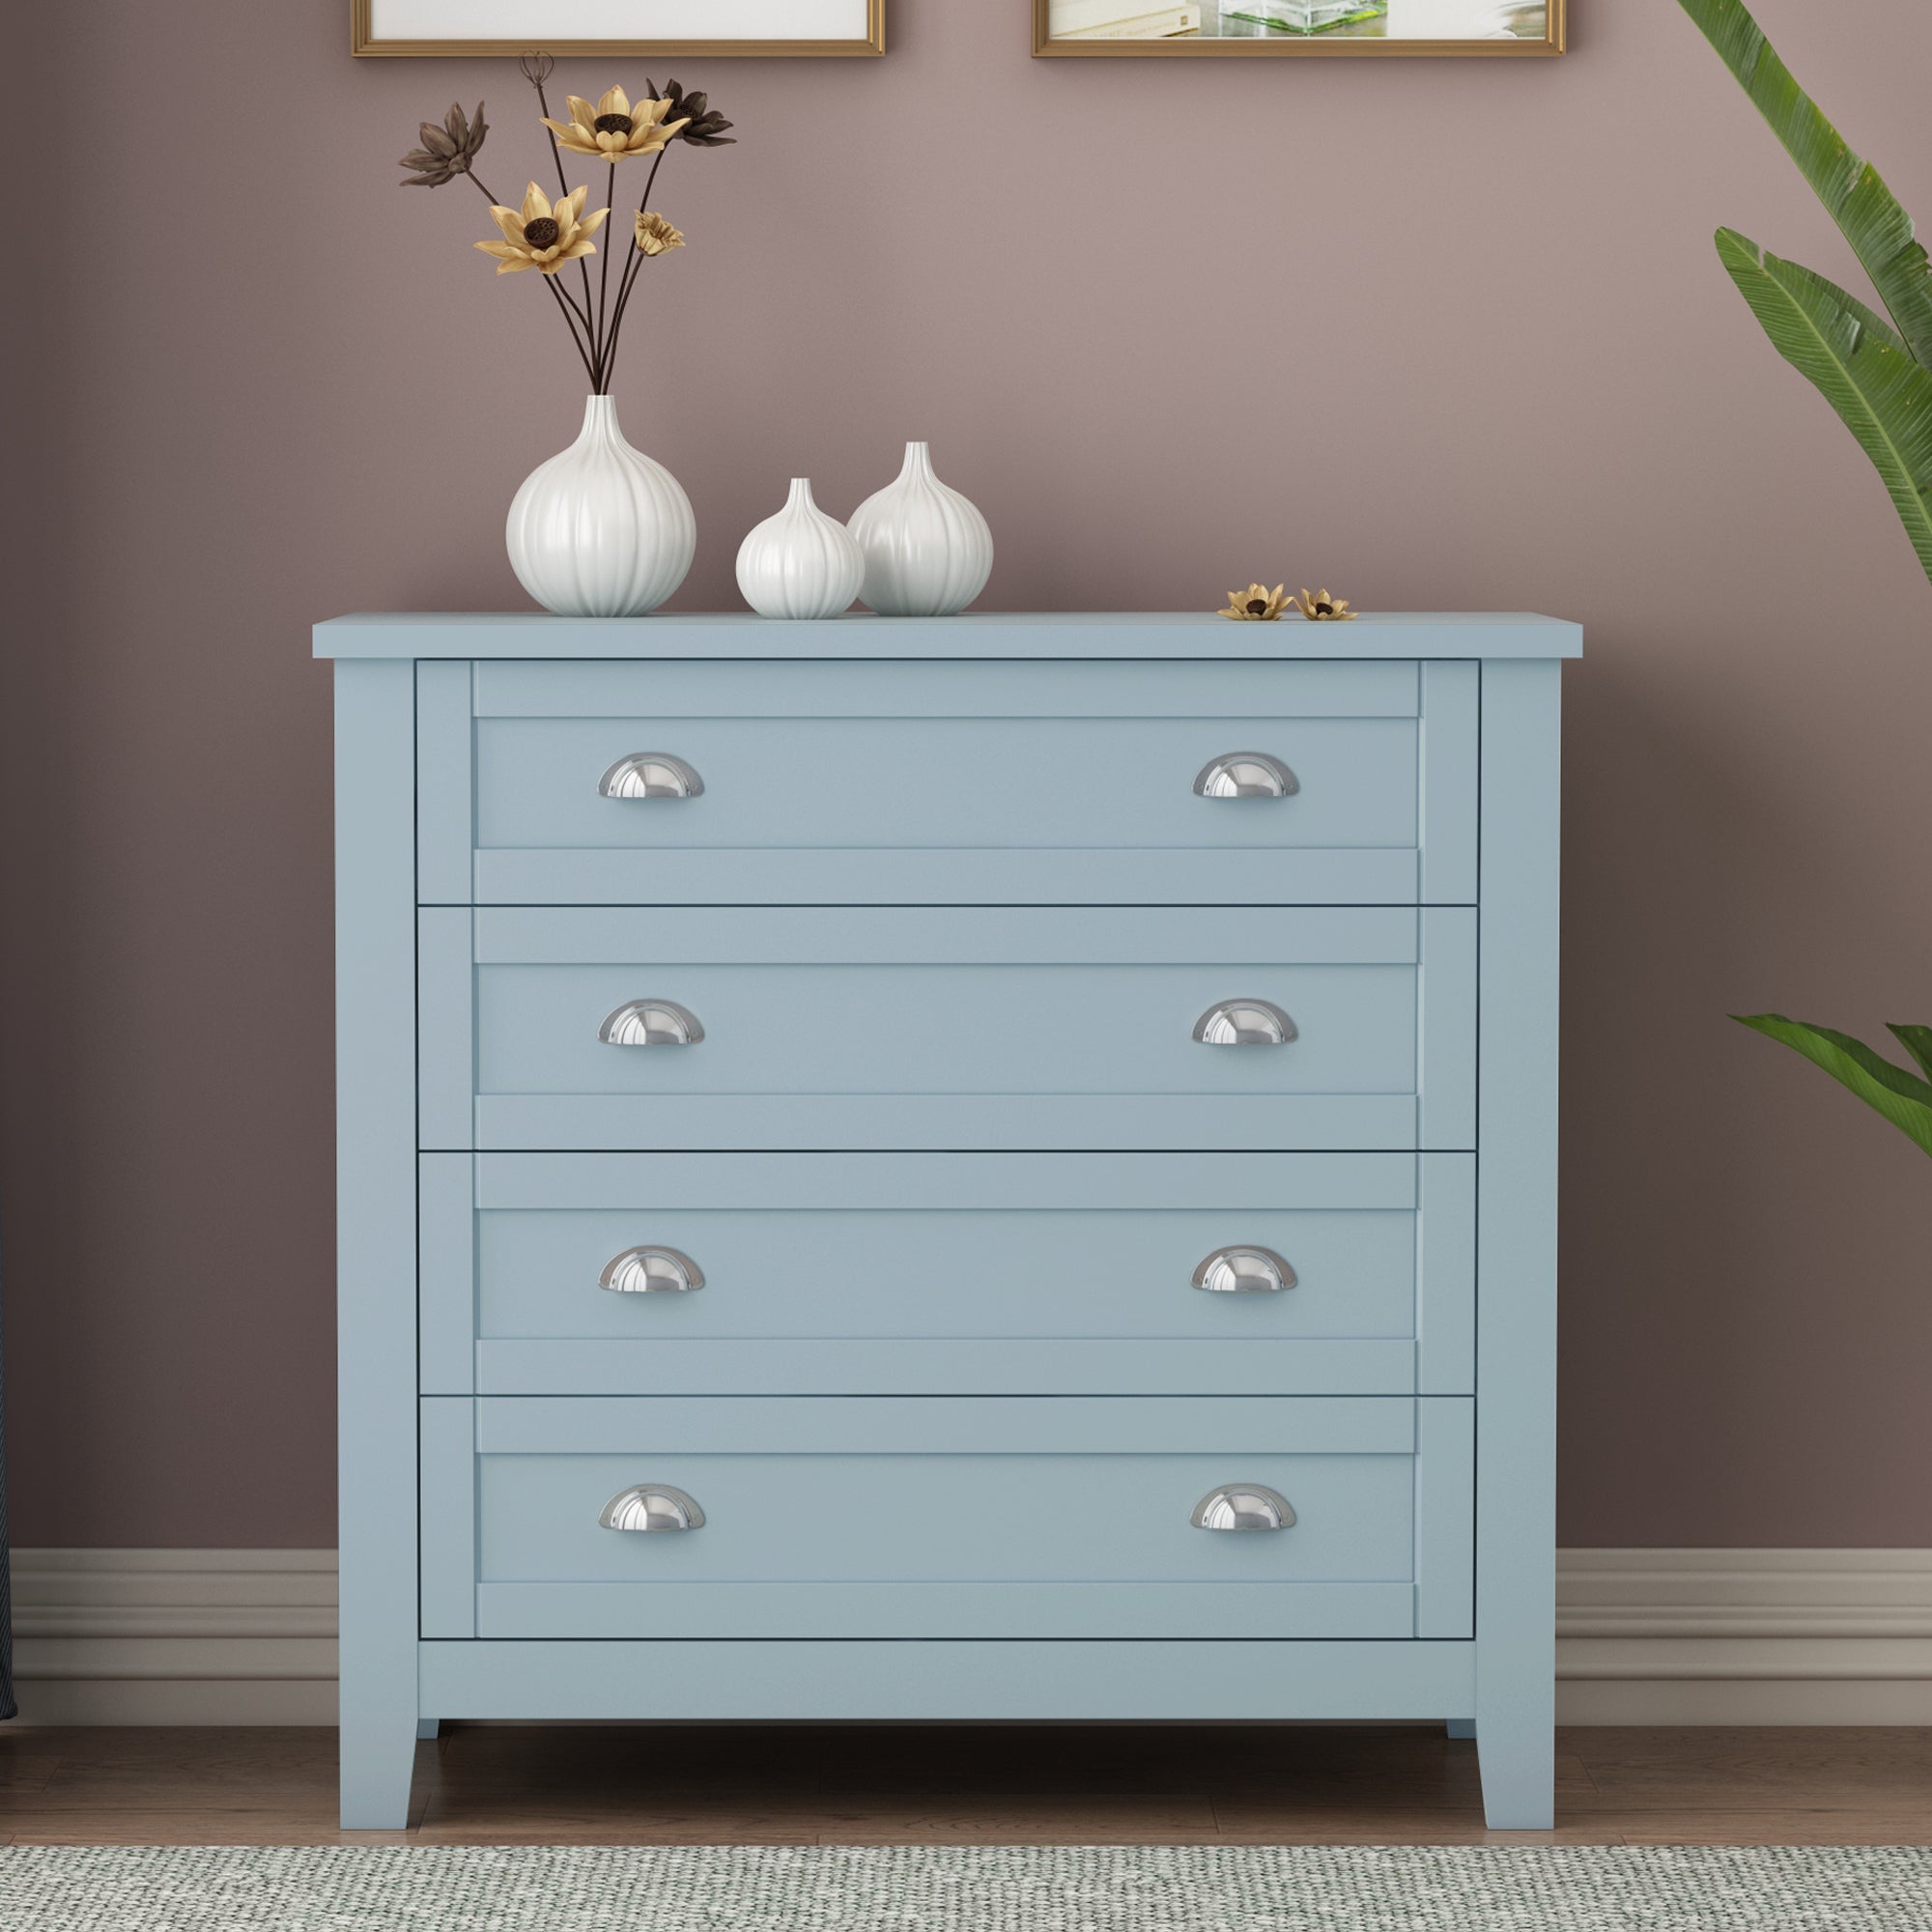 🆓🚛 Drawer Dresser Bar Cabinet Side Cabinet, Buffet Sideboard, Buffet Service Counter, Solid Wood Frame, Plasticdoor Panel, Retro Shell Handle, Applicable To Dining Room, Living Room, Kitchen Corridor, Blue-Gray